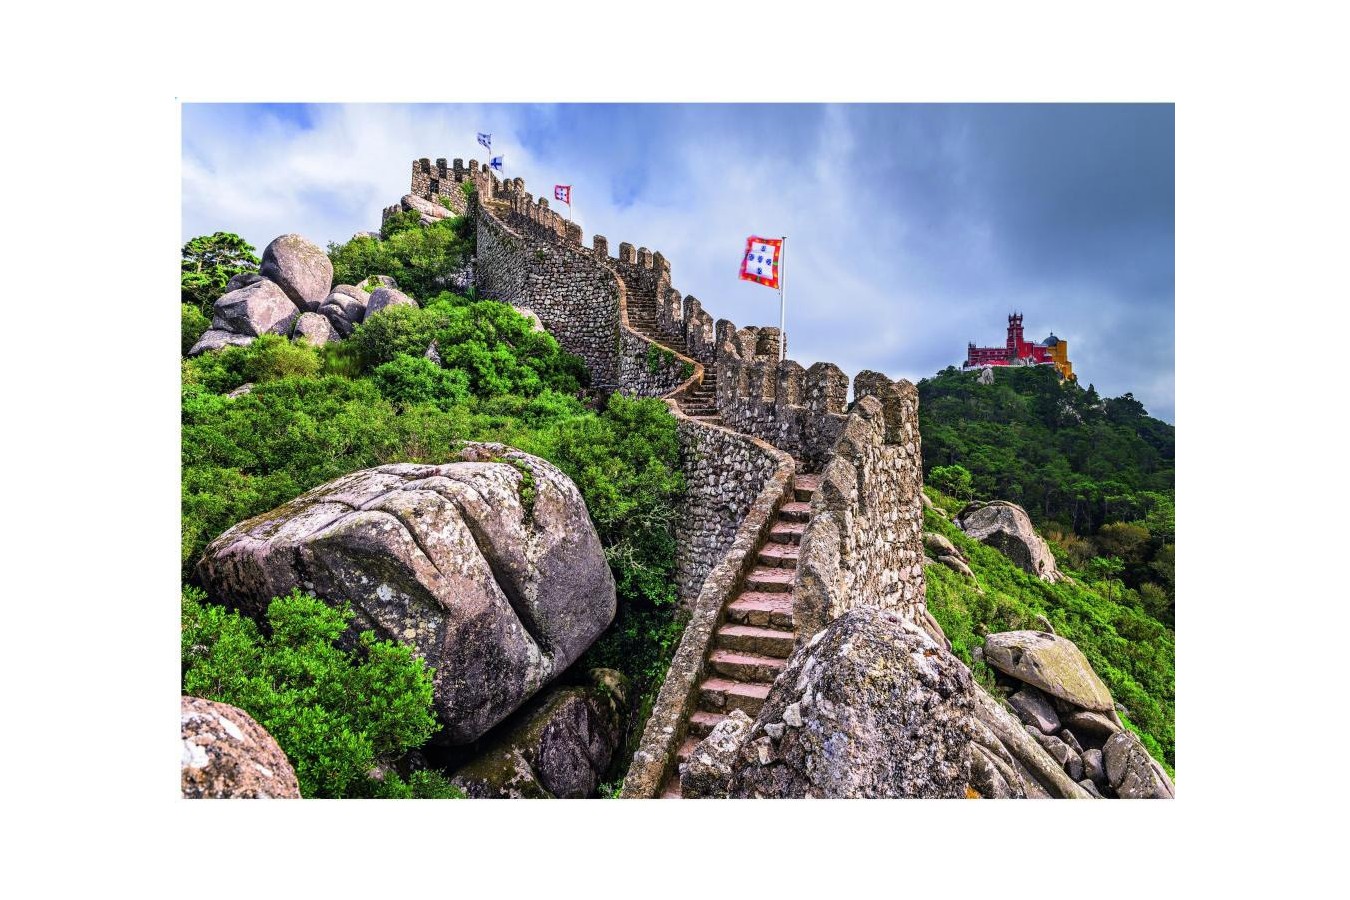 Puzzle Step - Castelo dos Mouros, Sintra, Portugal, 4000 piese (85409)